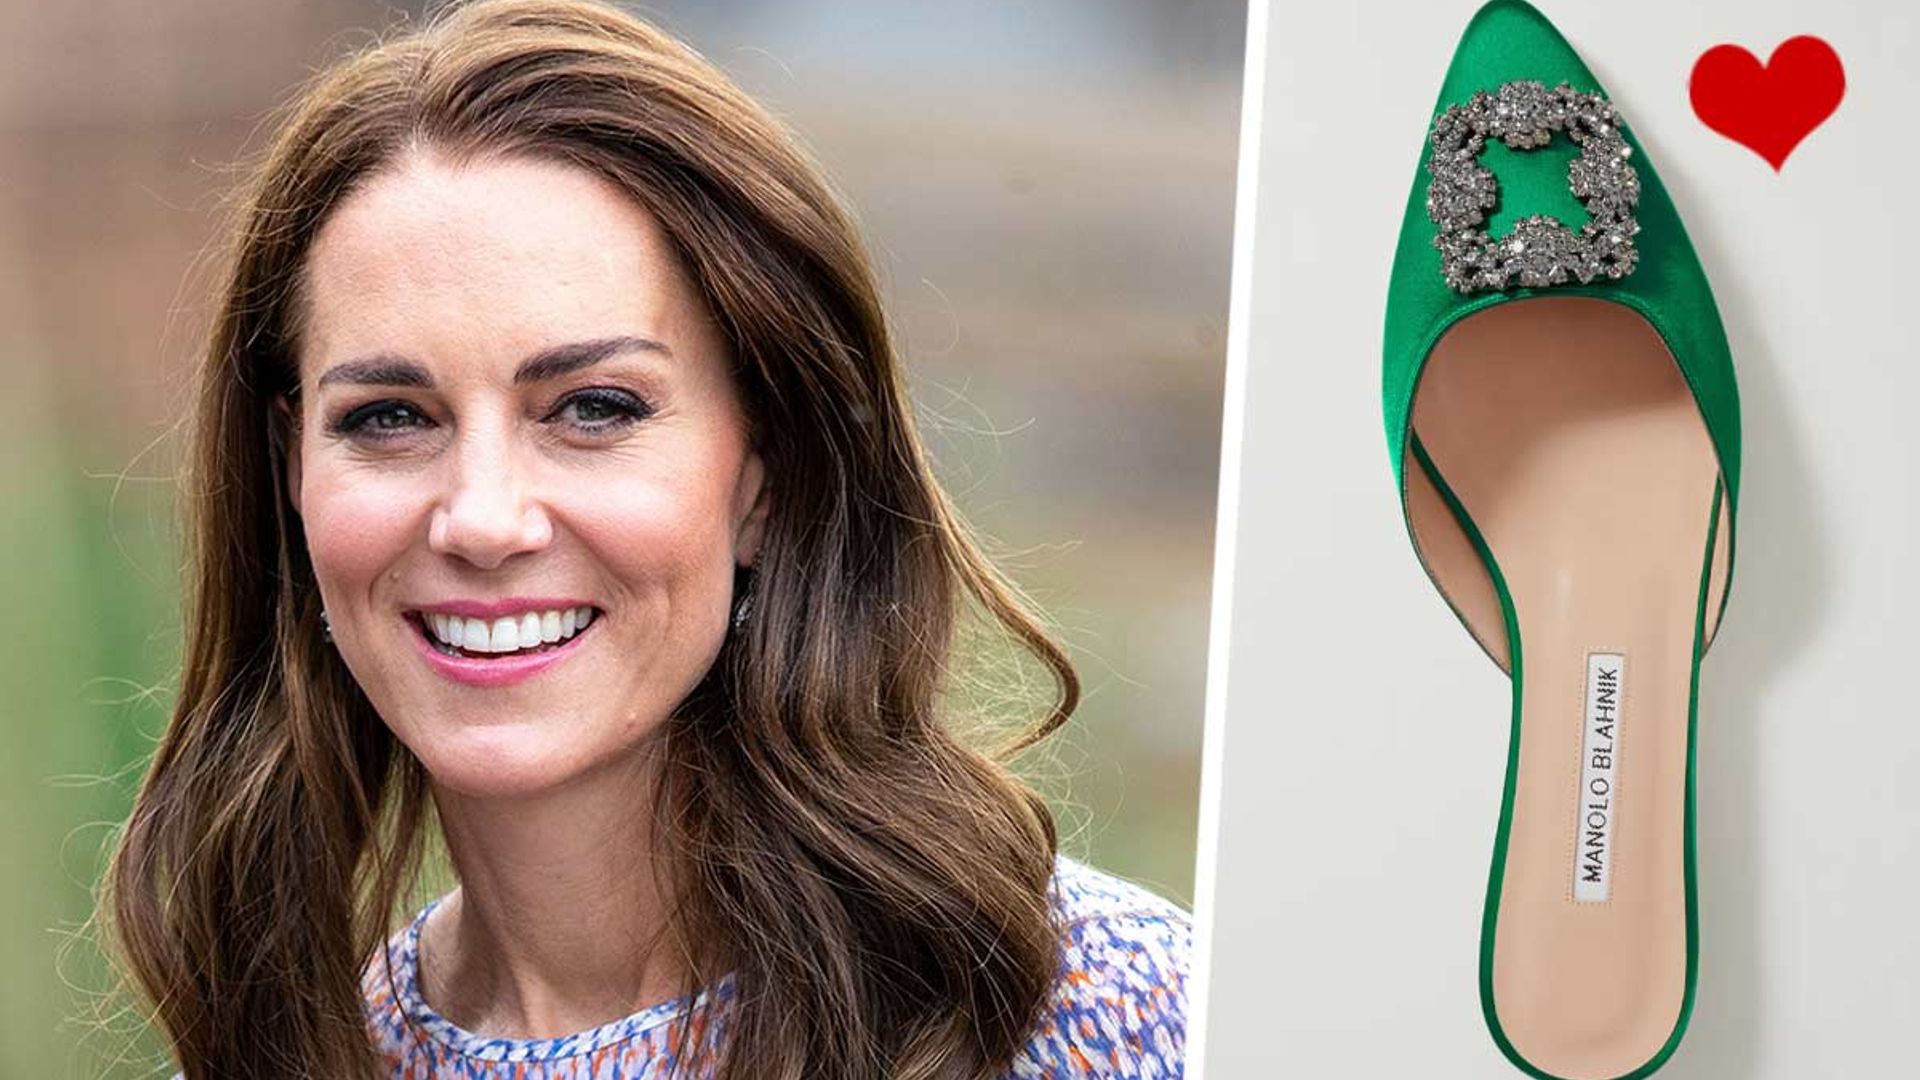 Love Kate Middleton’s Manolo Blahnik Hangisi shoes? Here's where to buy them